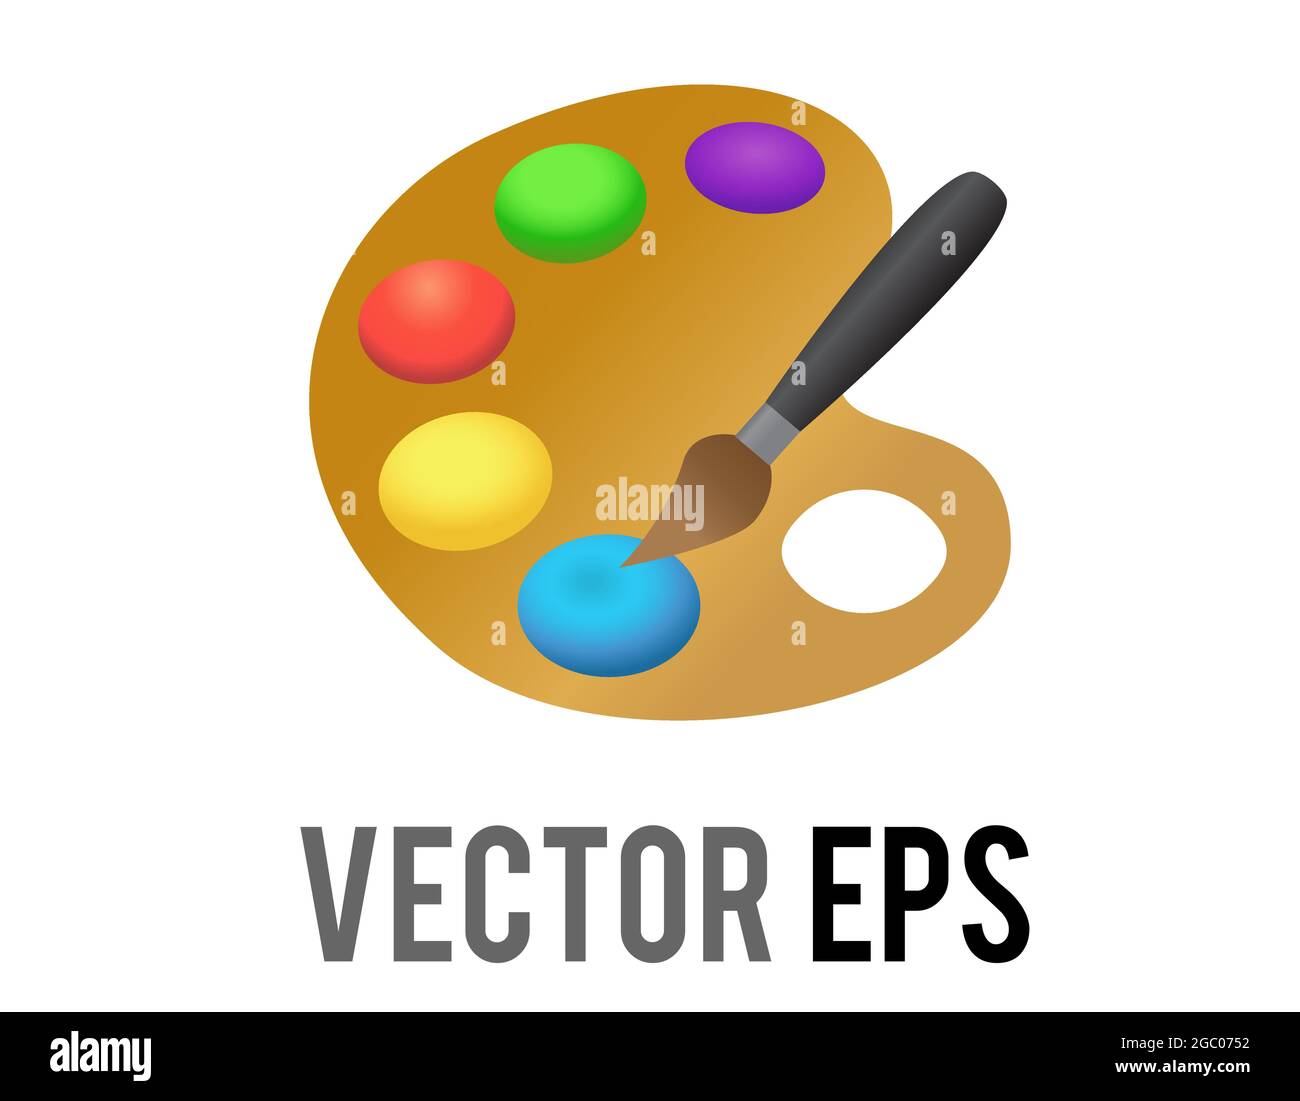 The isolated vector watercolor brush and artist palette icon used when painting, to store and mix paint colors Stock Vector